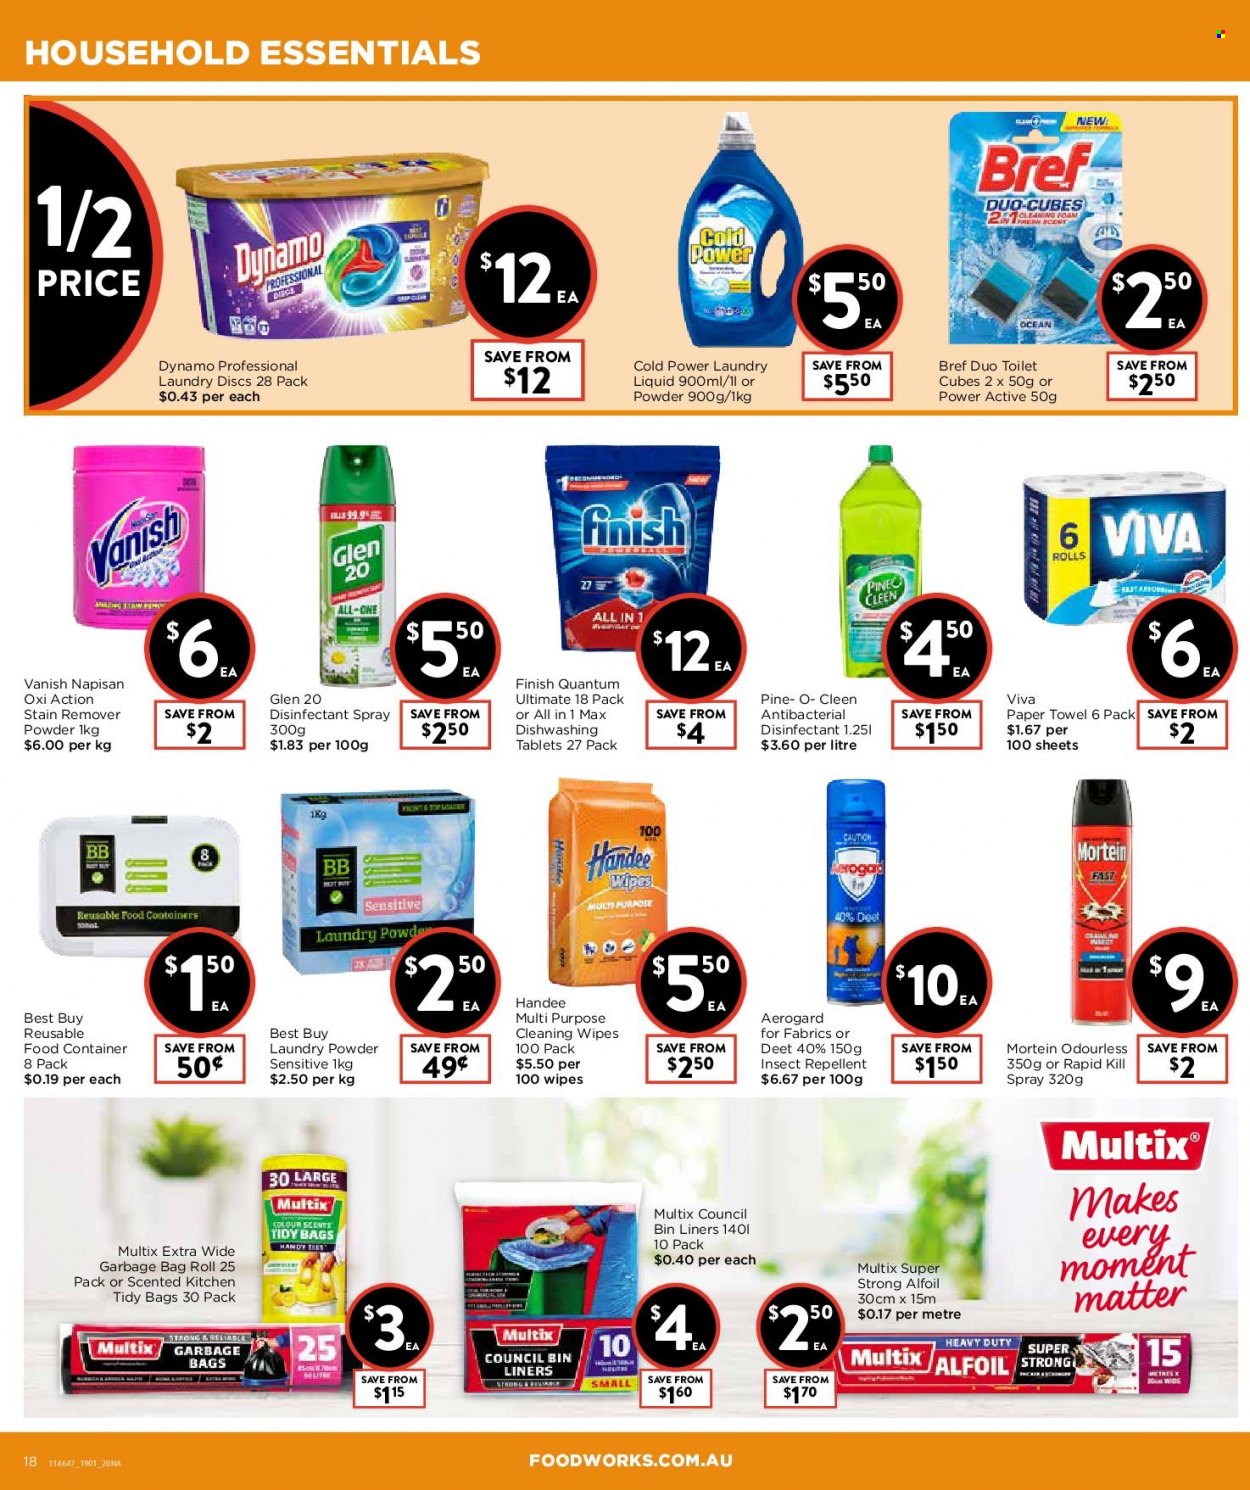 thumbnail - Foodworks Catalogue - 19 Jan 2022 - 25 Jan 2022 - Sales products - cleansing wipes, wipes, Handee, paper towels, desinfection, stain remover, Mortein, Vanish, laundry powder, laundry detergent, Finish Powerball, Finish Quantum Ultimate, antibacterial spray, bag, repellent, bin, container. Page 18.